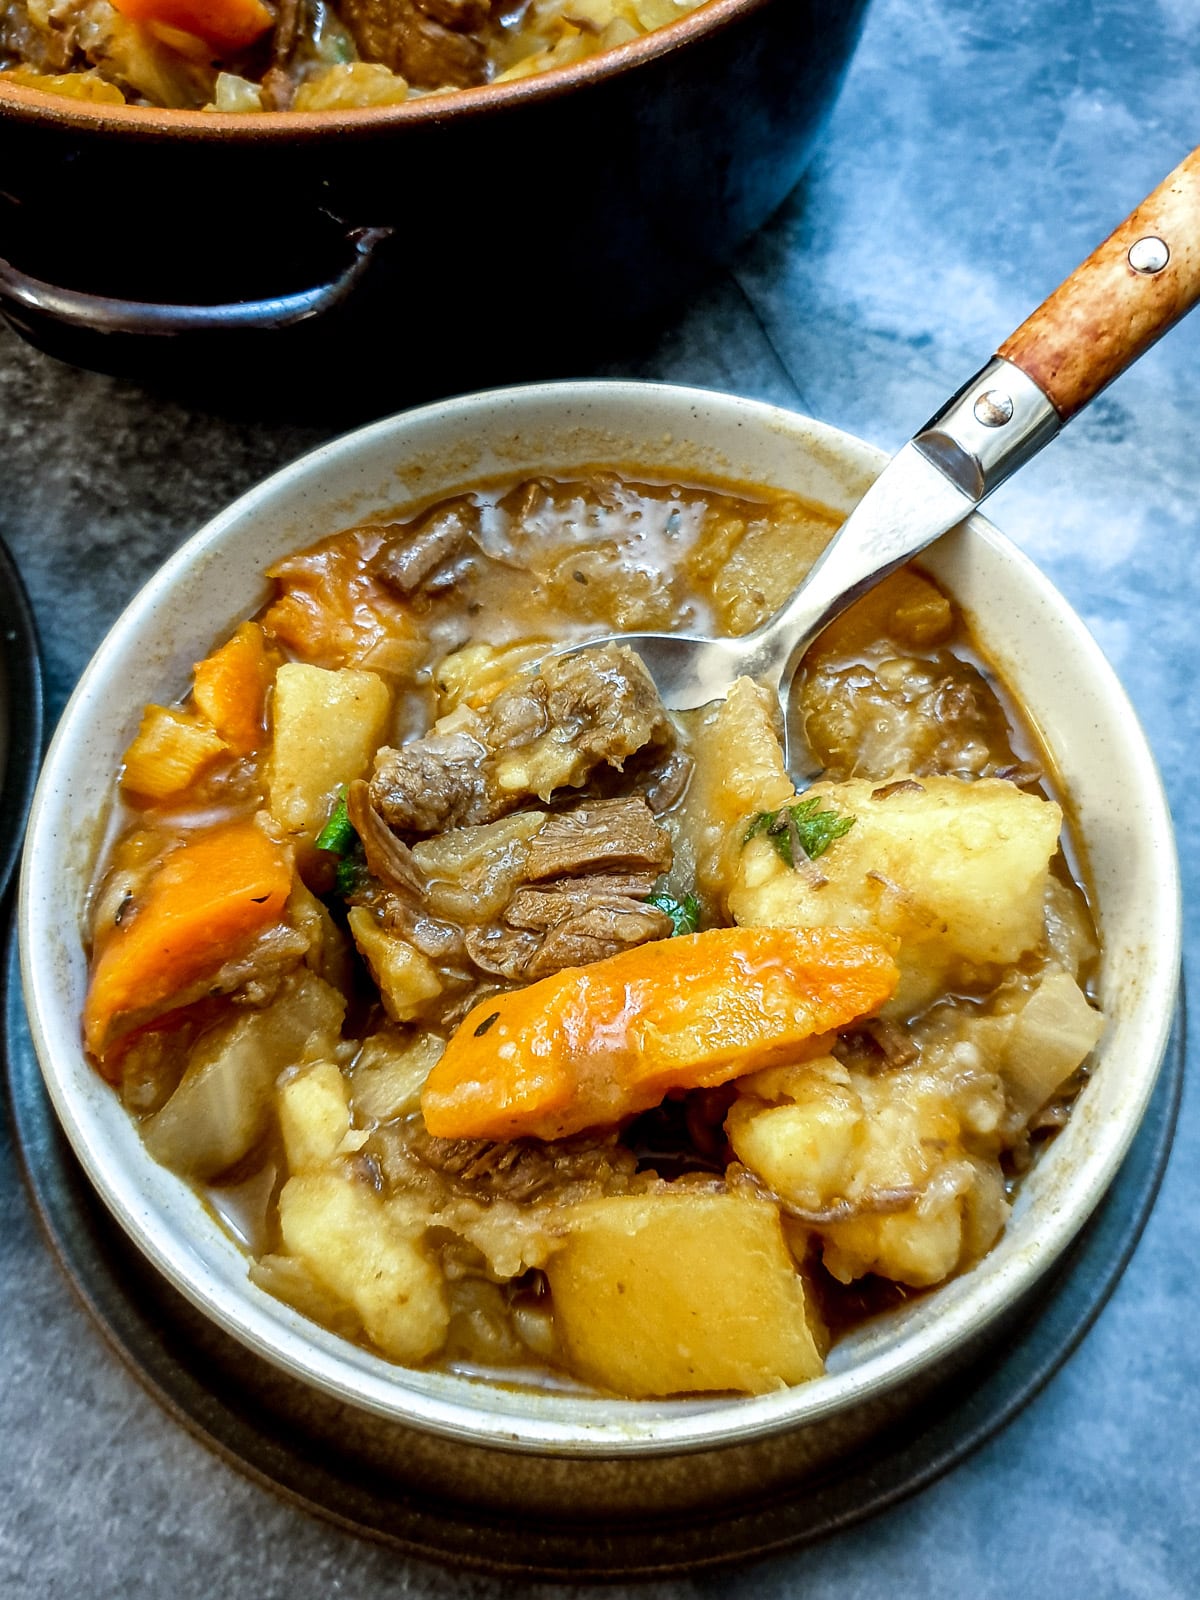 Close up of a bowl of beef stew showing the tenderness of the meat.